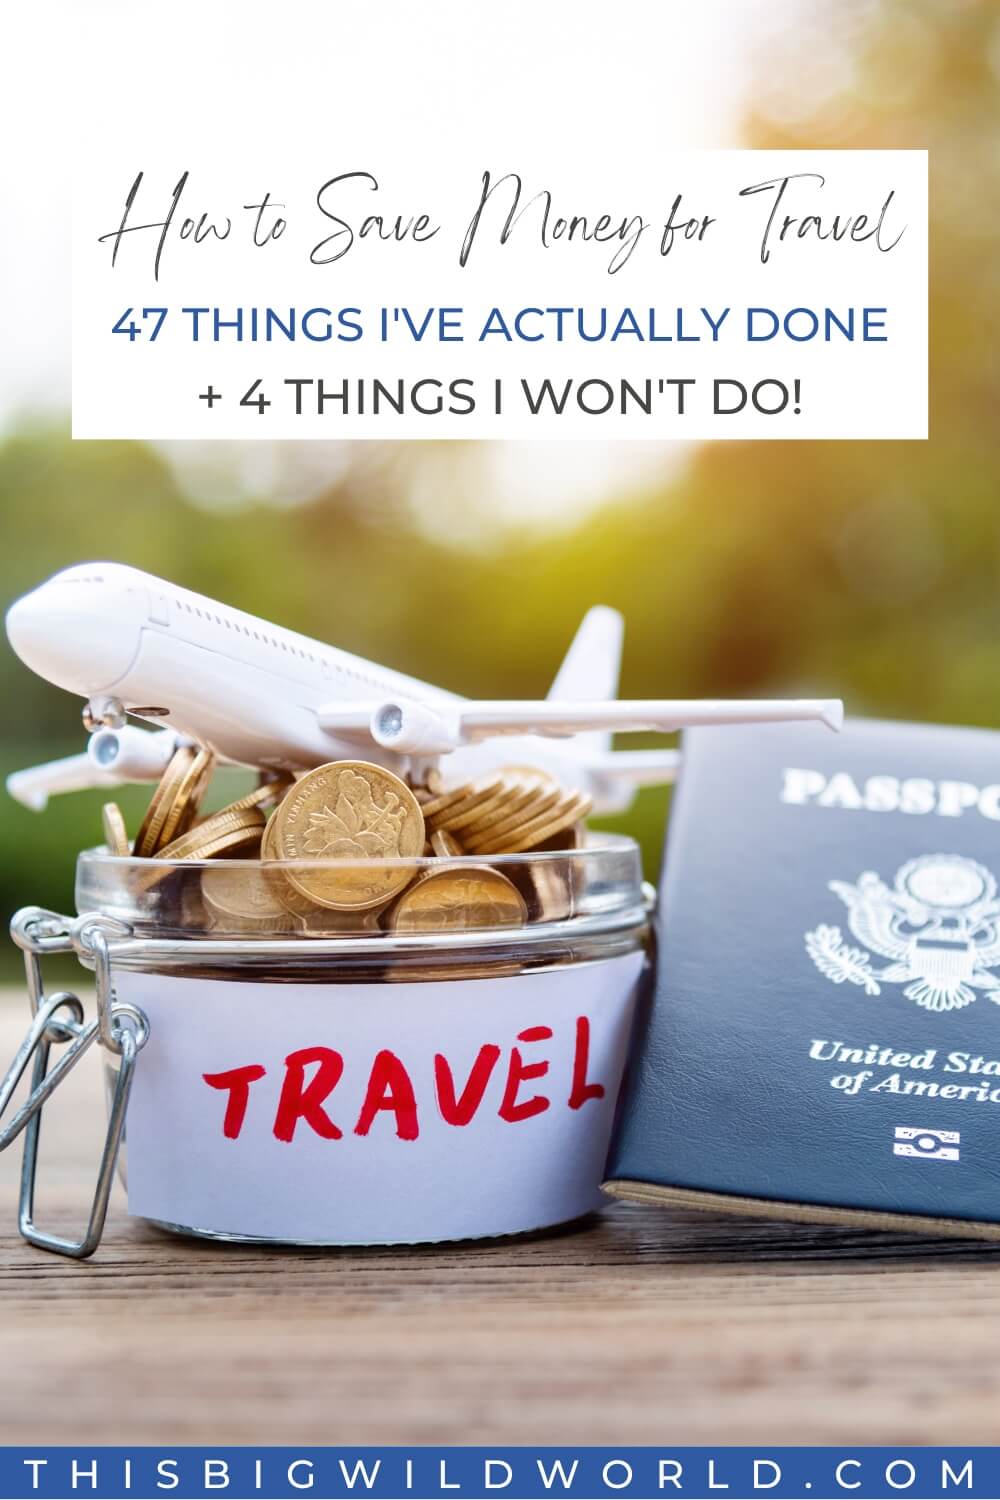 Text: How to save money for travel Image: Toy plane, jar of coins and passport on a wood table.